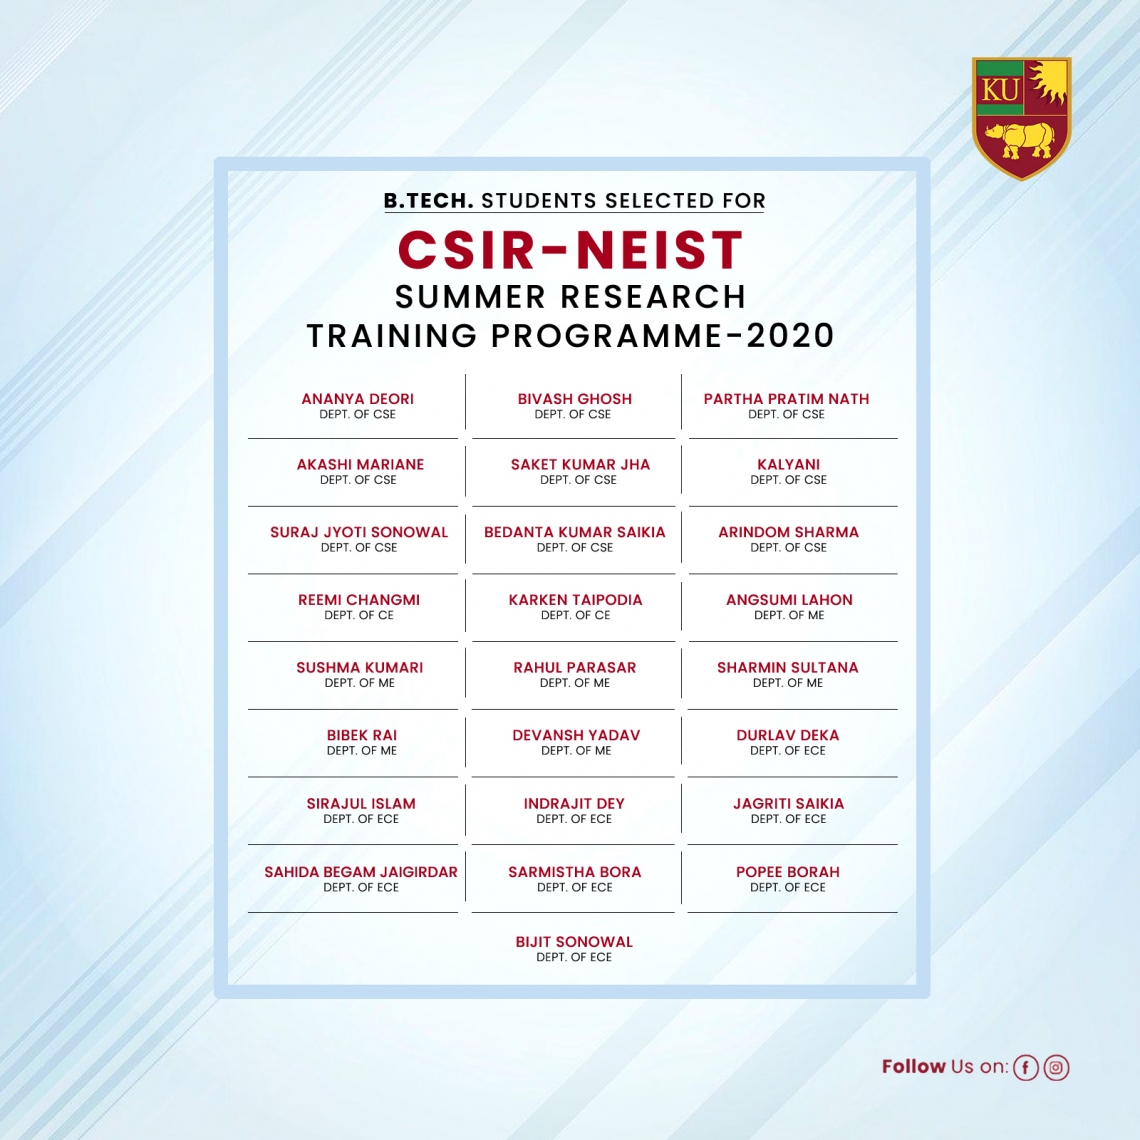 25 student from KU SET selected for Summer Research Training Programme (CSIR-SRTP) 2020